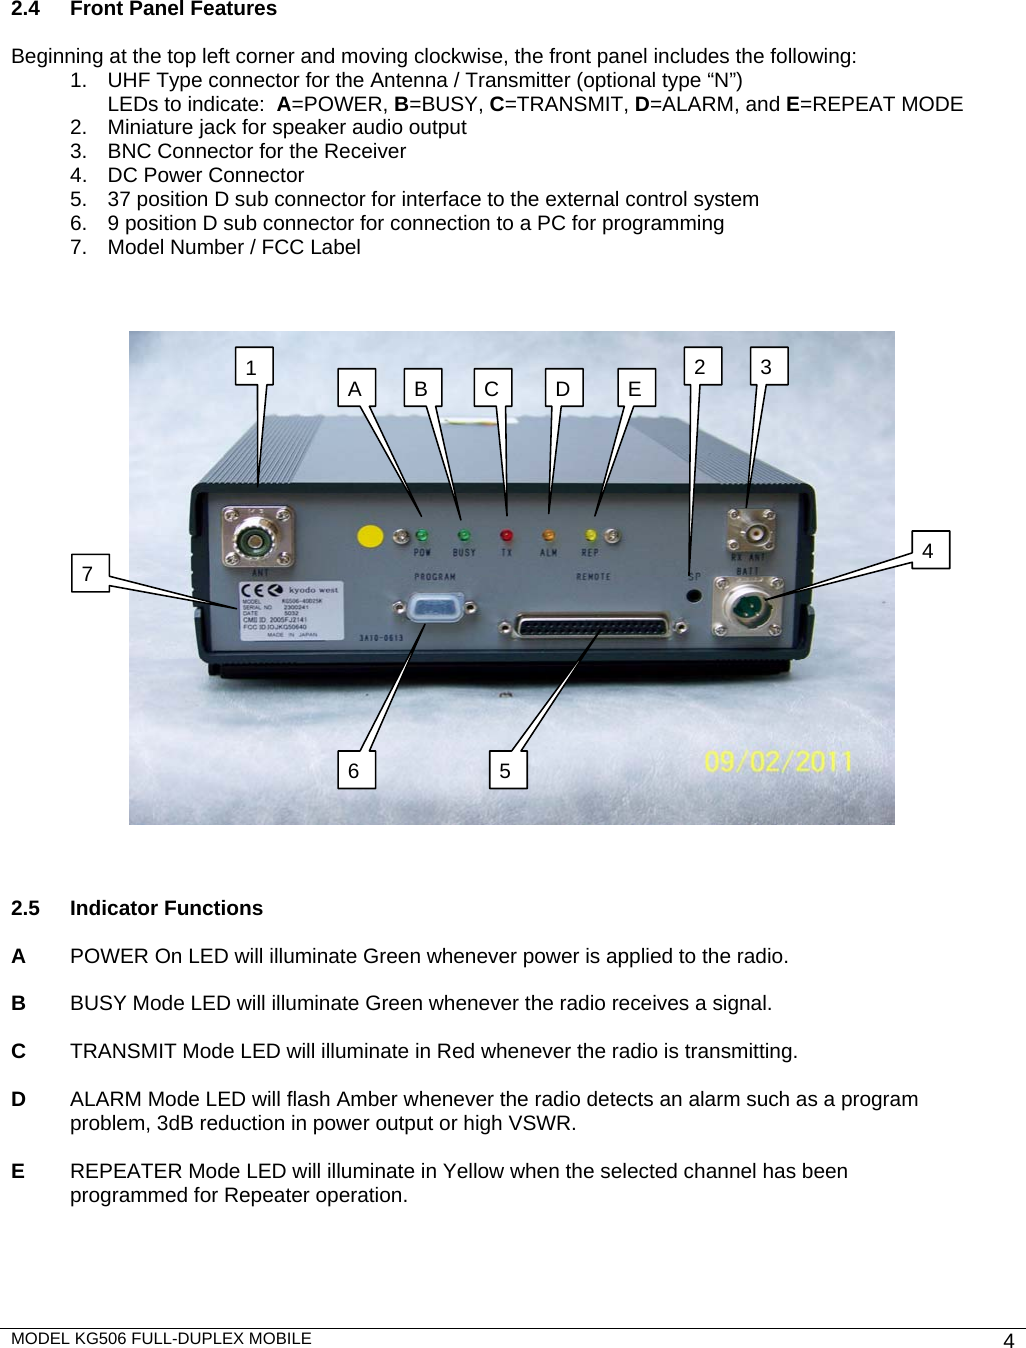 MODEL KG506 FULL-DUPLEX MOBILE    4          2.4  Front Panel Features  Beginning at the top left corner and moving clockwise, the front panel includes the following: 1.  UHF Type connector for the Antenna / Transmitter (optional type “N”) LEDs to indicate:  A=POWER, B=BUSY, C=TRANSMIT, D=ALARM, and E=REPEAT MODE 2.  Miniature jack for speaker audio output 3.  BNC Connector for the Receiver 4.  DC Power Connector  5.  37 position D sub connector for interface to the external control system  6.  9 position D sub connector for connection to a PC for programming 7.  Model Number / FCC Label        2.5 Indicator Functions  A    POWER On LED will illuminate Green whenever power is applied to the radio.  B  BUSY Mode LED will illuminate Green whenever the radio receives a signal.   C  TRANSMIT Mode LED will illuminate in Red whenever the radio is transmitting.  D  ALARM Mode LED will flash Amber whenever the radio detects an alarm such as a program problem, 3dB reduction in power output or high VSWR.  E  REPEATER Mode LED will illuminate in Yellow when the selected channel has been   programmed for Repeater operation.       1  32476 5A  B  C  E D 